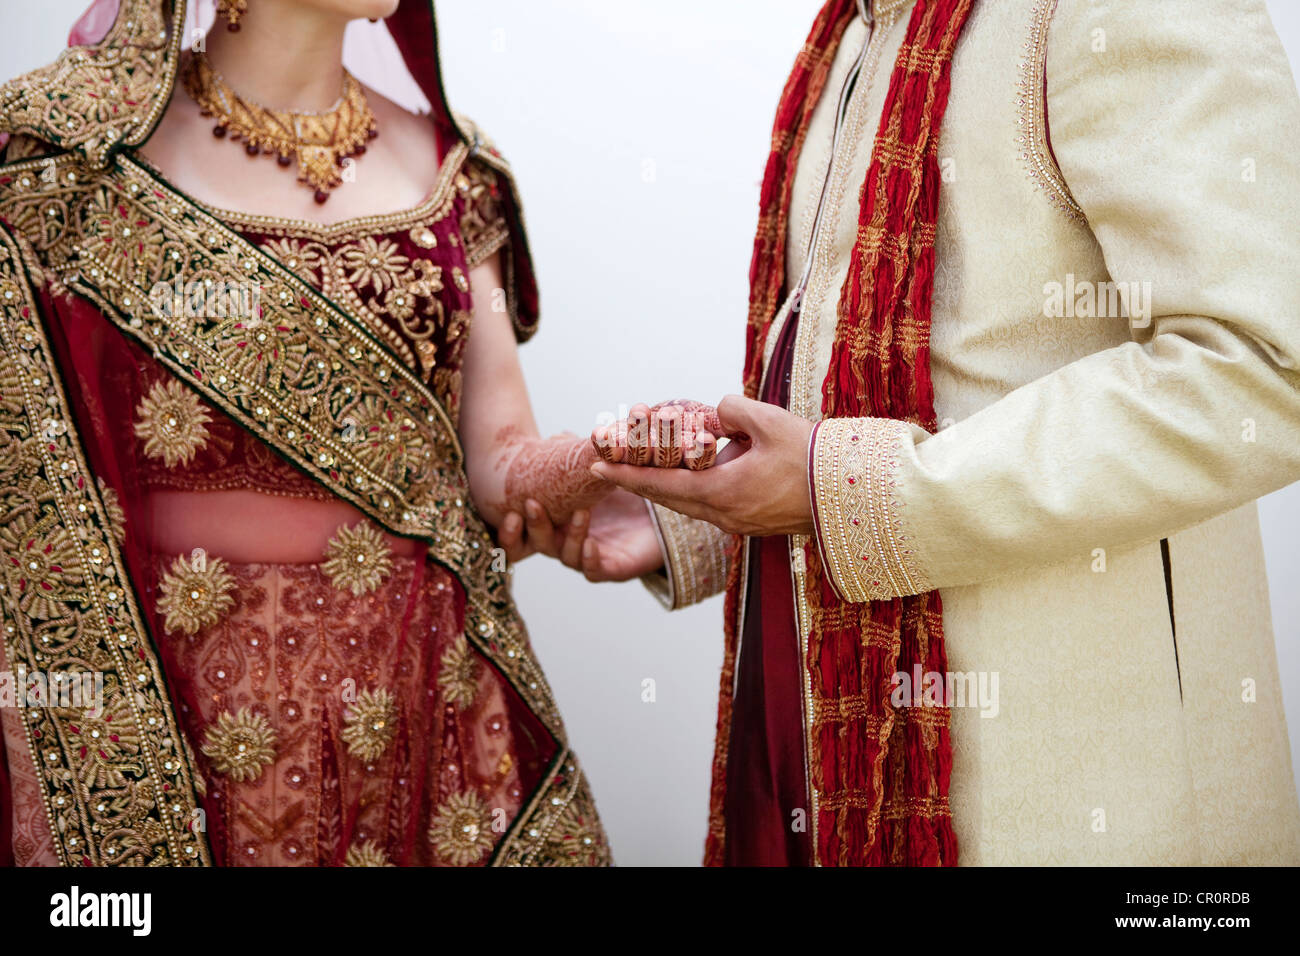 Bride and groom in traditional Indian wedding clothing Stock Photo